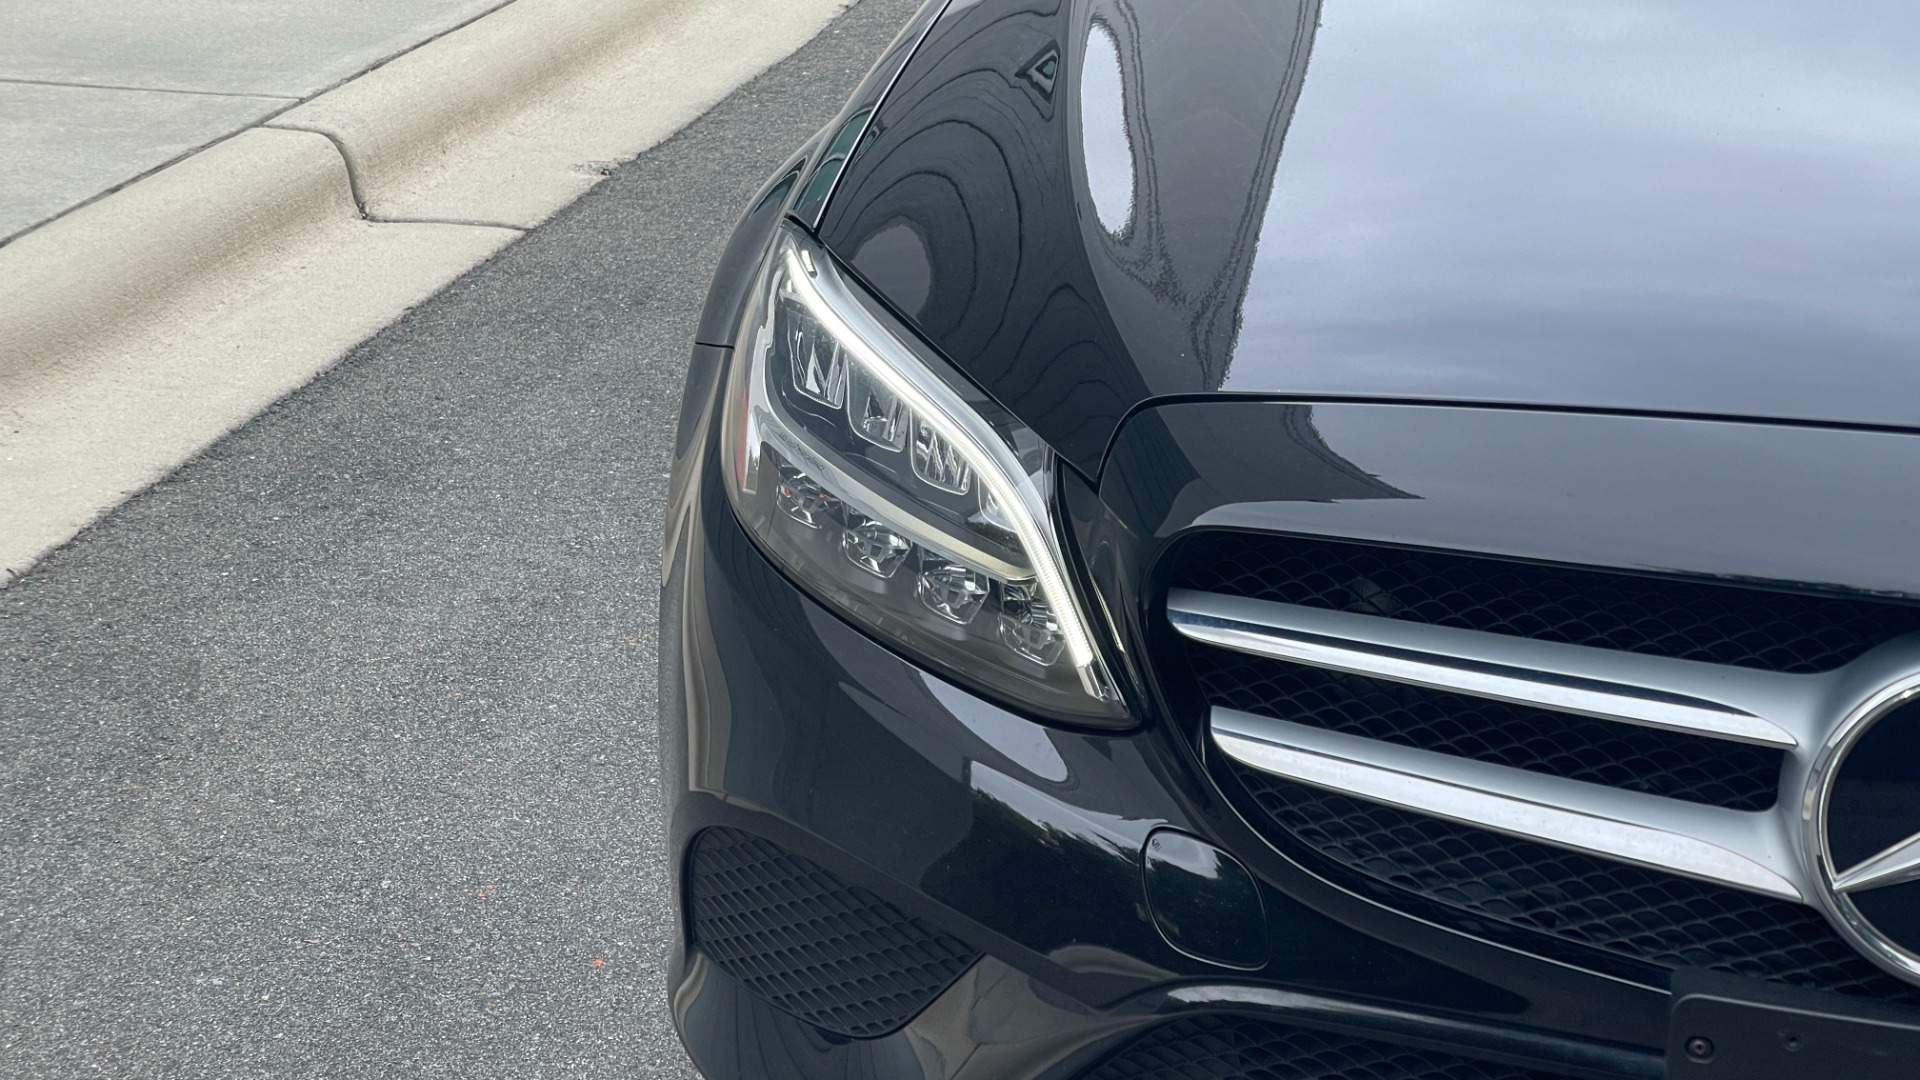 Used 2019 Mercedes-Benz C-Class C 300 / 4MATIC / BURMESTER SOUND / PANORAMIC ROOF / PREMIUM / MULTIMEDIA for sale $33,495 at Formula Imports in Charlotte NC 28227 23